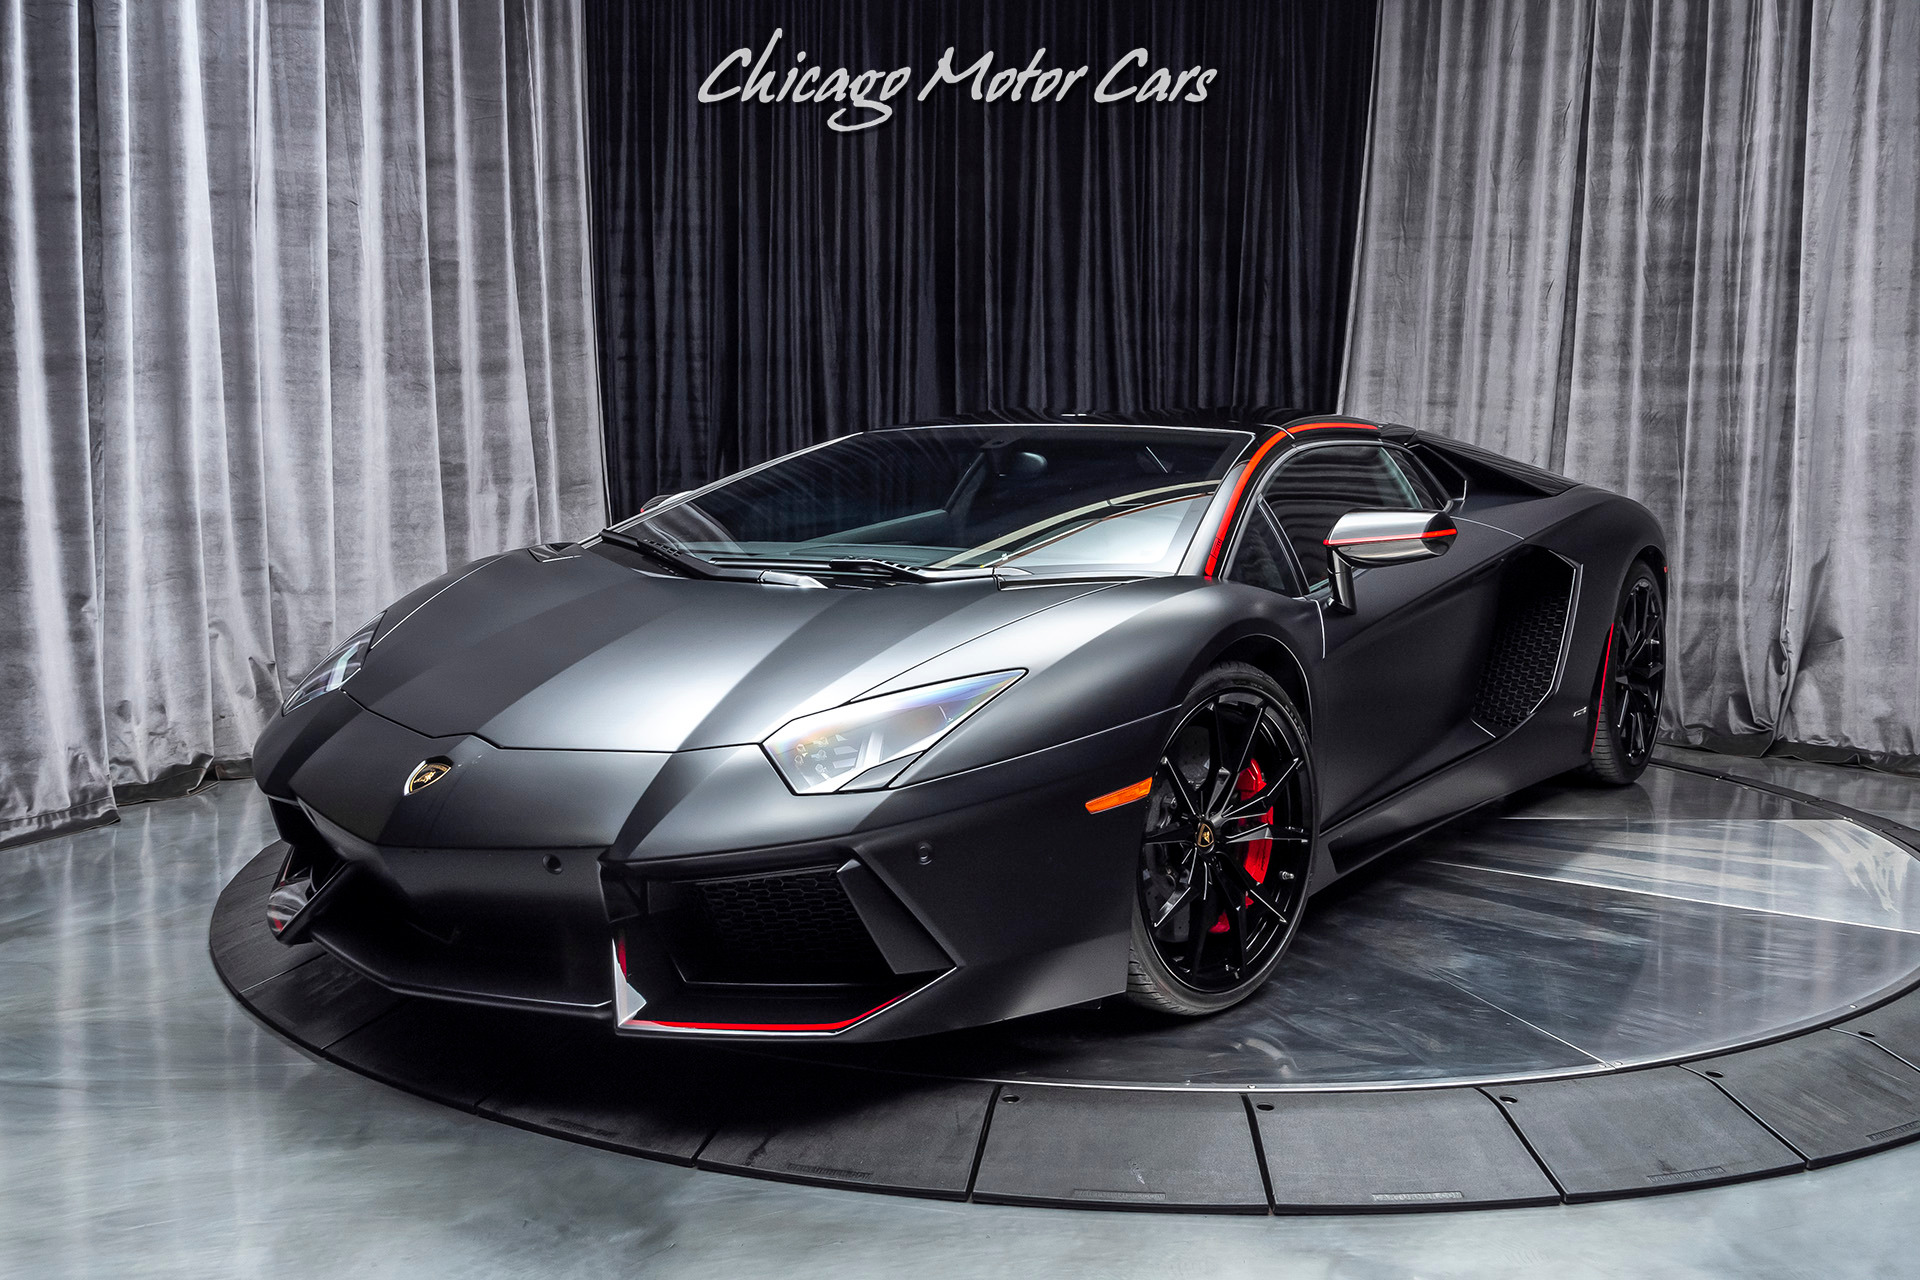 Used-2016-Lamborghini-Aventador-LP700-4-Pirelli-Edition-Roadster-MSRP-476K-1-OF-30-PRODUCED-FOR-THE-US